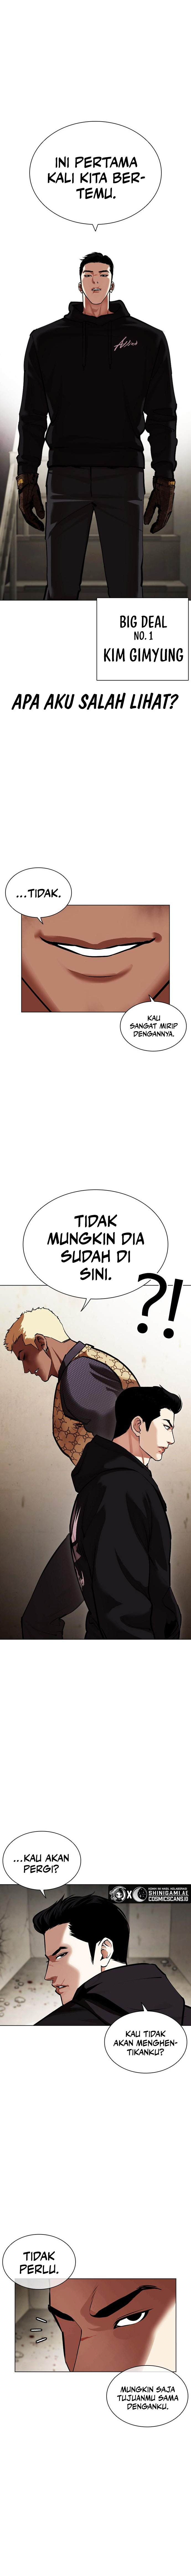 Lookism Chapter 464 Image 13